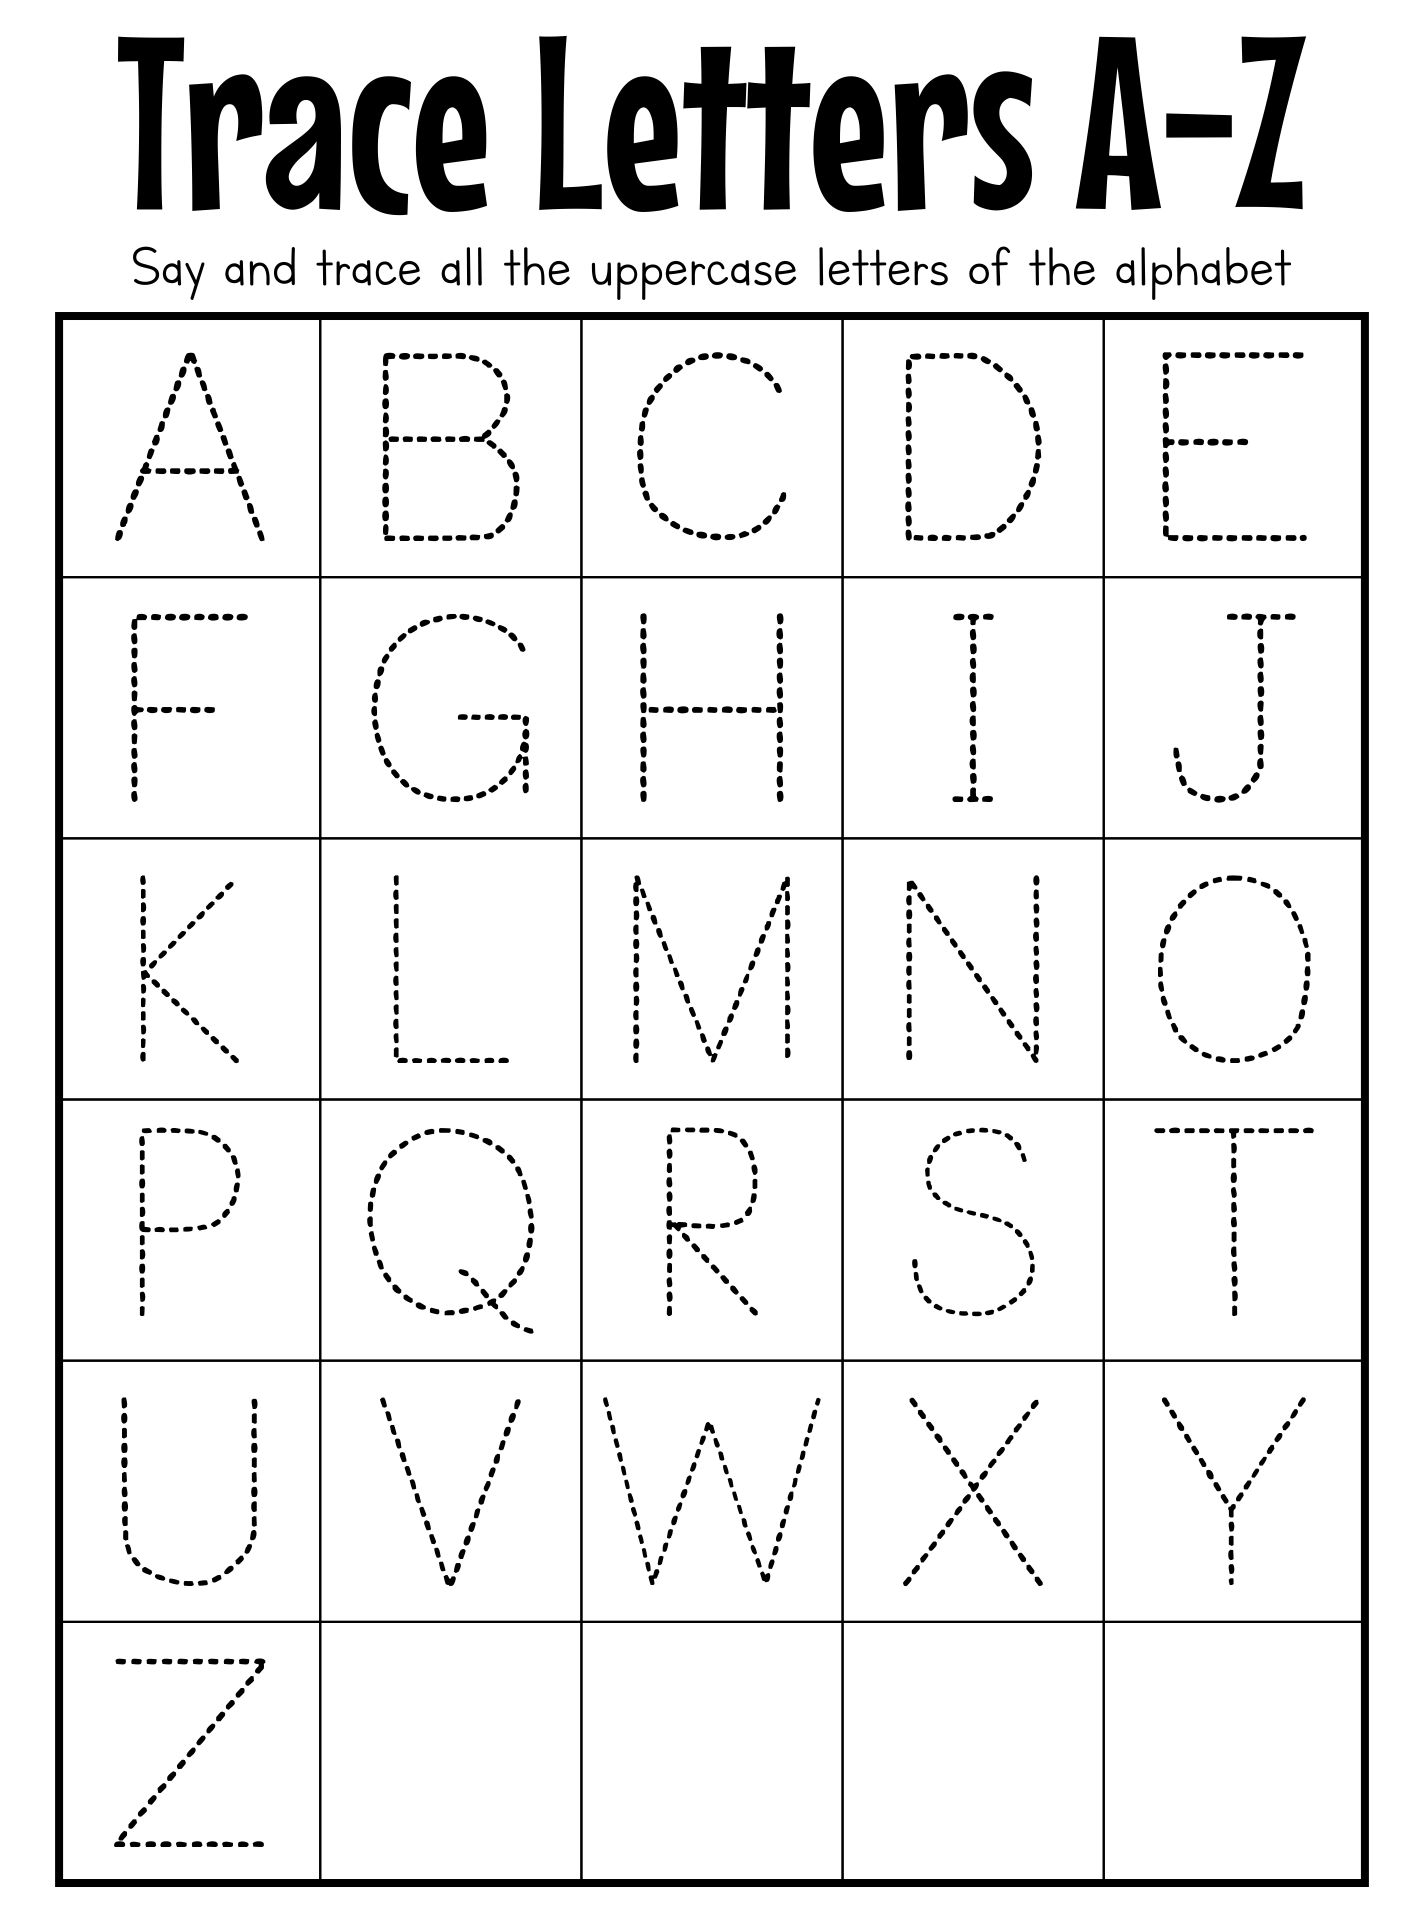 printable-traceable-alphabet-letters-printable-world-holiday